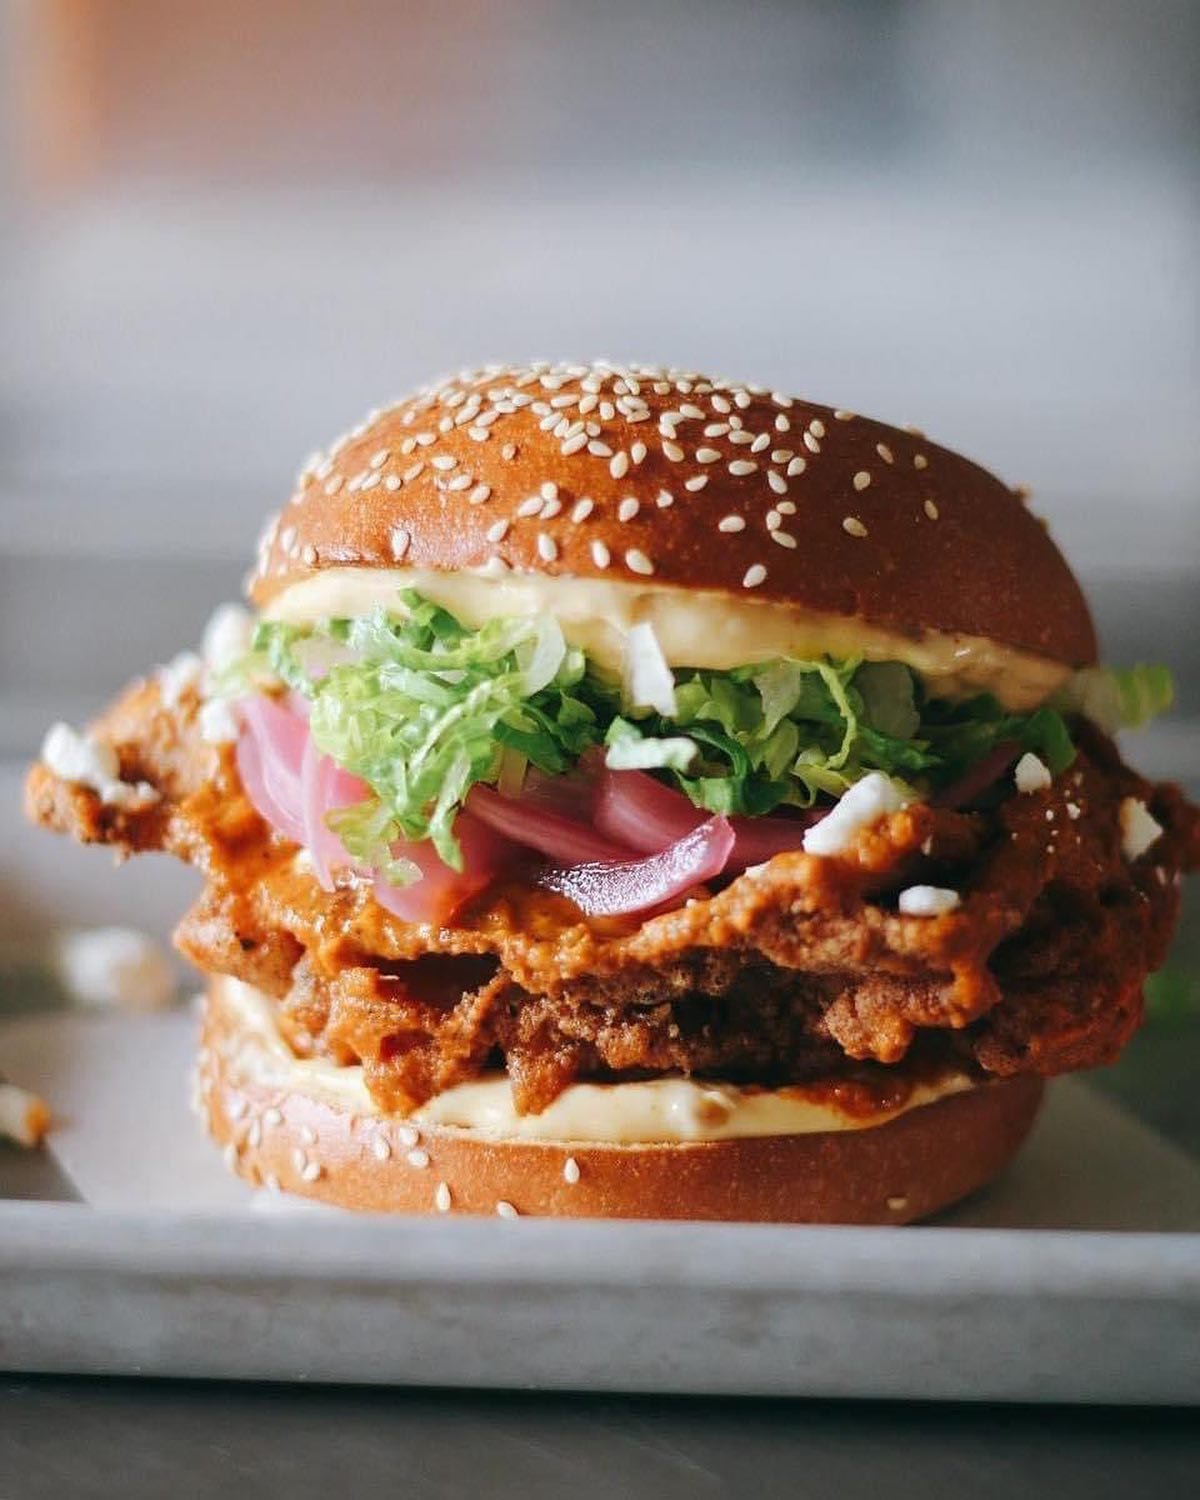 Haaaaaaaave you met the Tikka Clucka? Available every day at Honey&rsquo;s, this Indian-influenced hybrid combines our signature craggy fried chicken thigh, doused in creamy Tikka Masala sauce and finished with garlic achaar aioli, pickled red onions